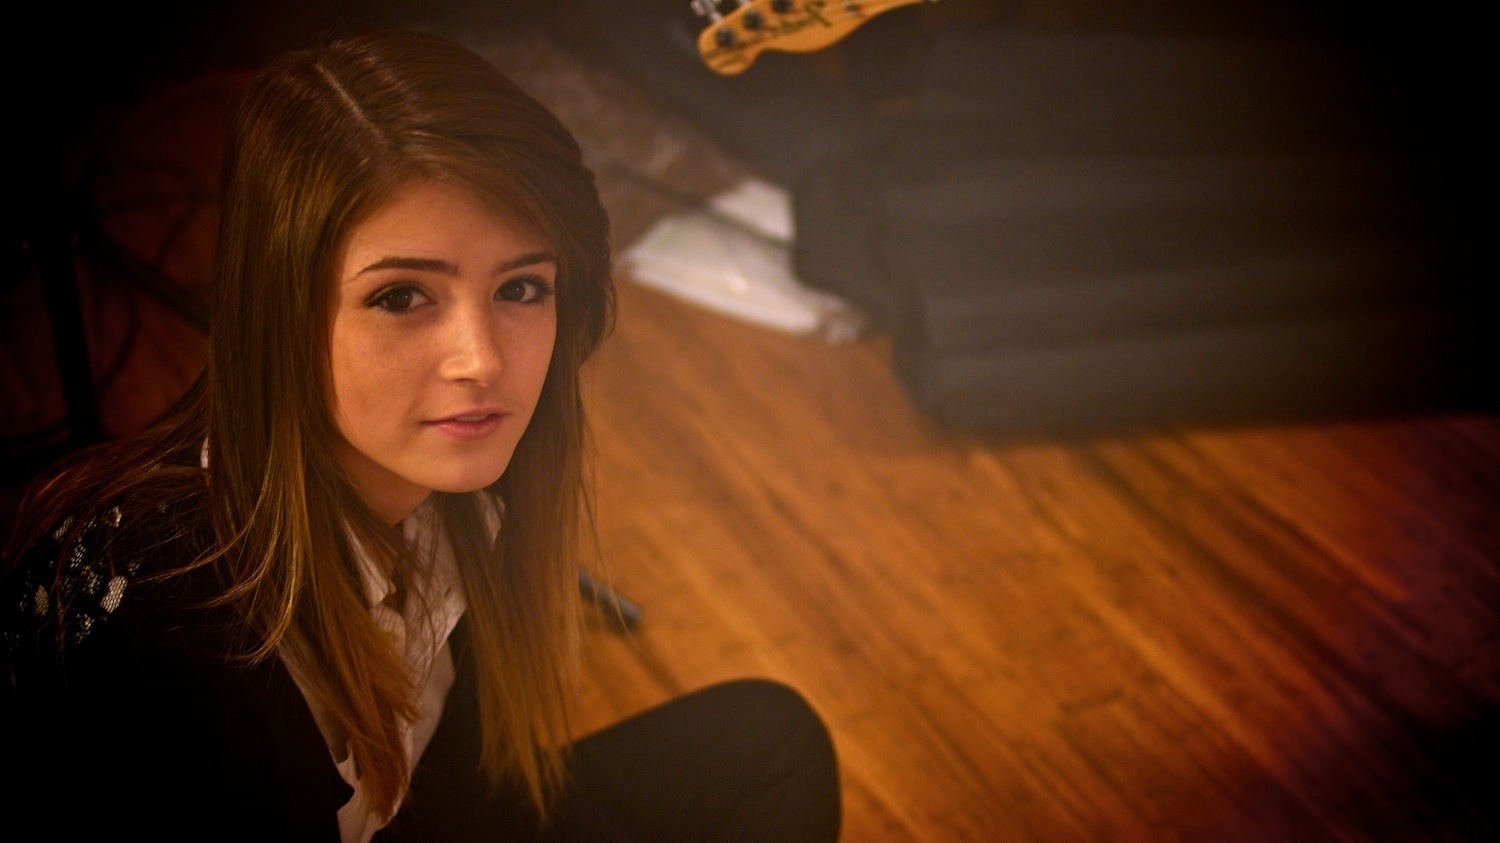 Nice Chrissy Costanza 2016 Wallpapers, 4470165